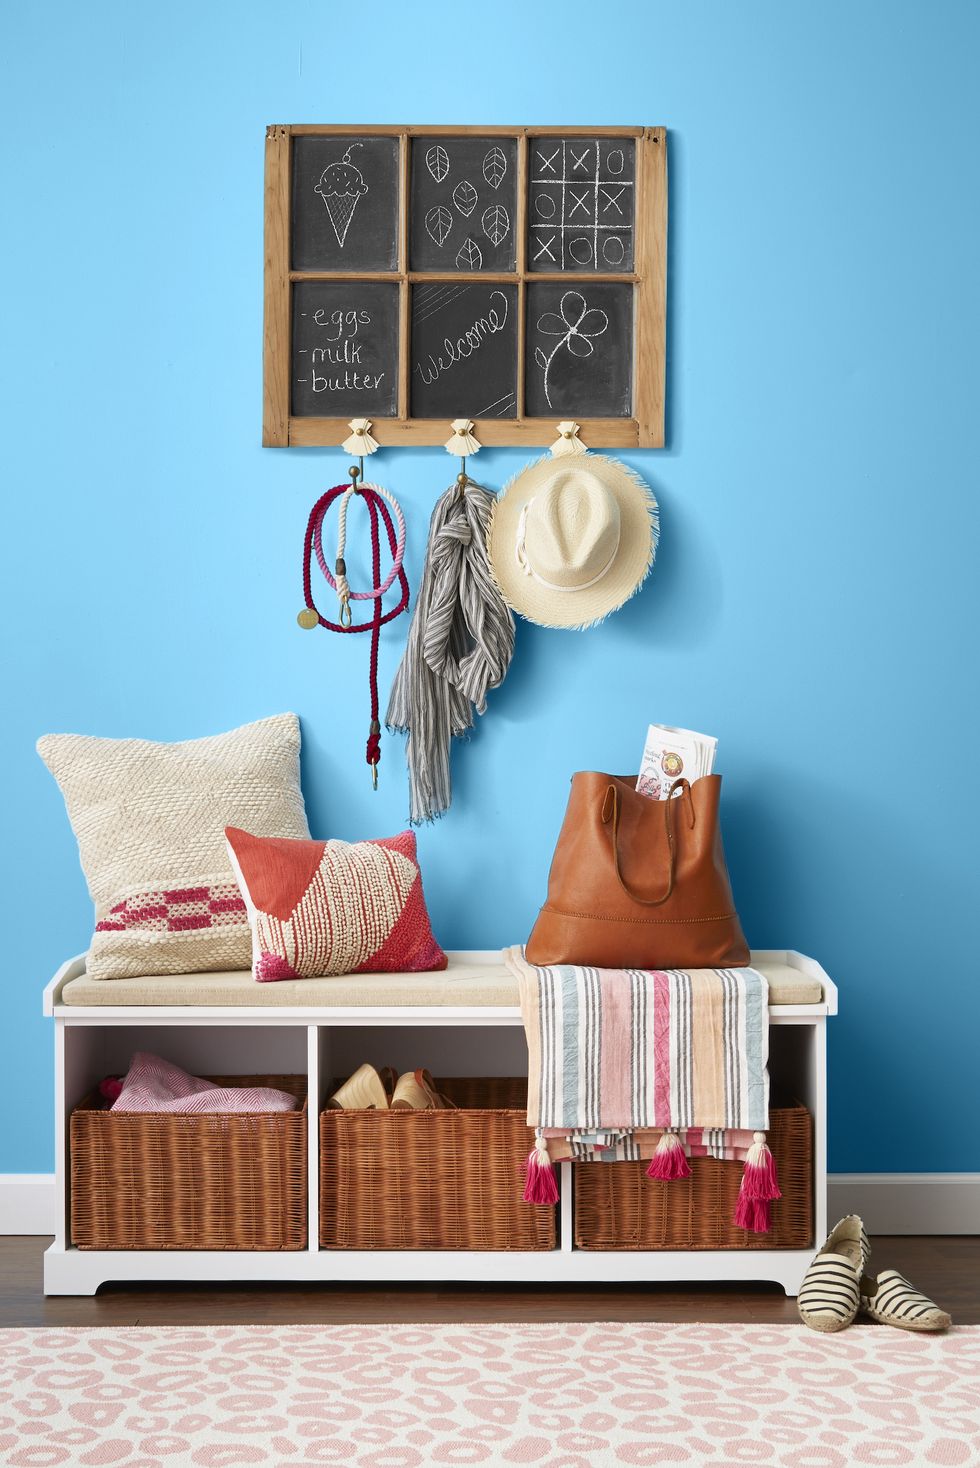 chalk message board upcycled furniture